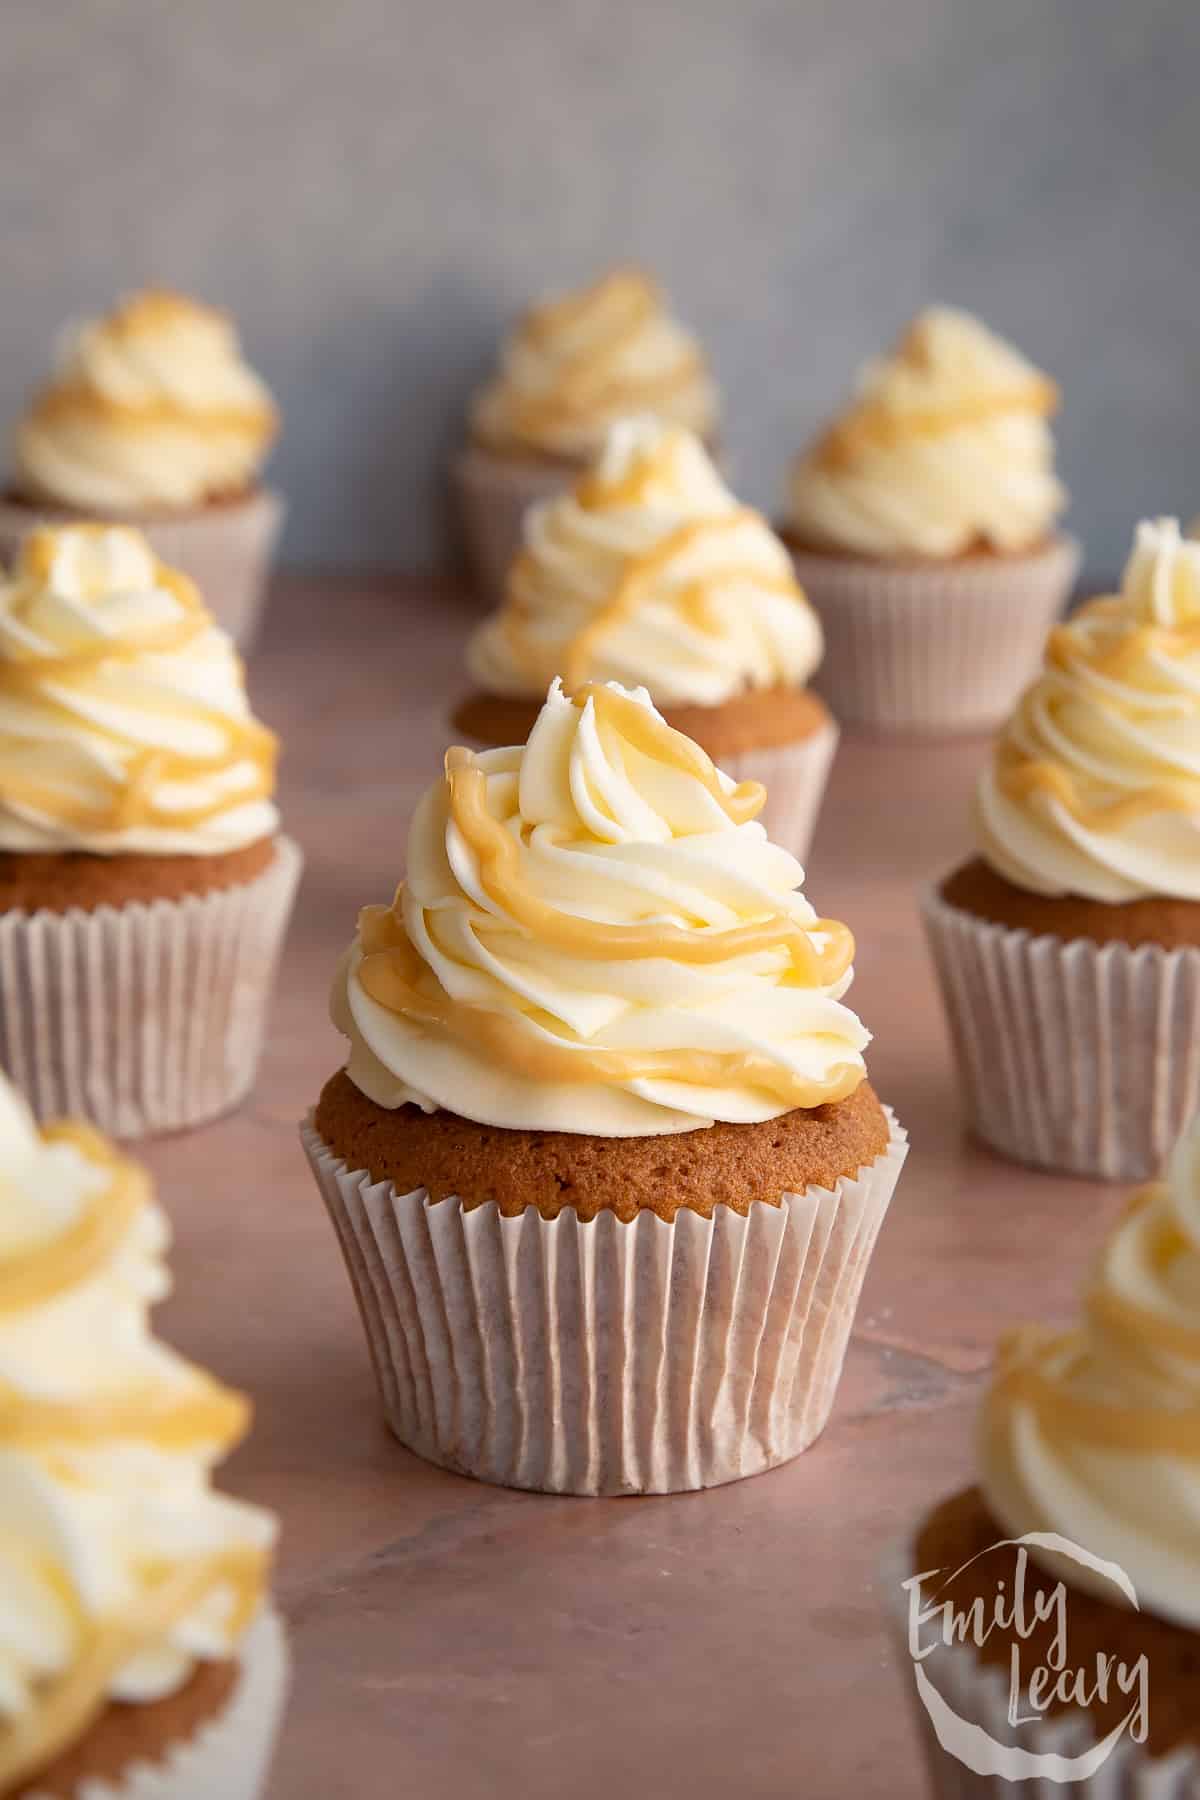 Caramel latte cupcakes lined up on a plain background.